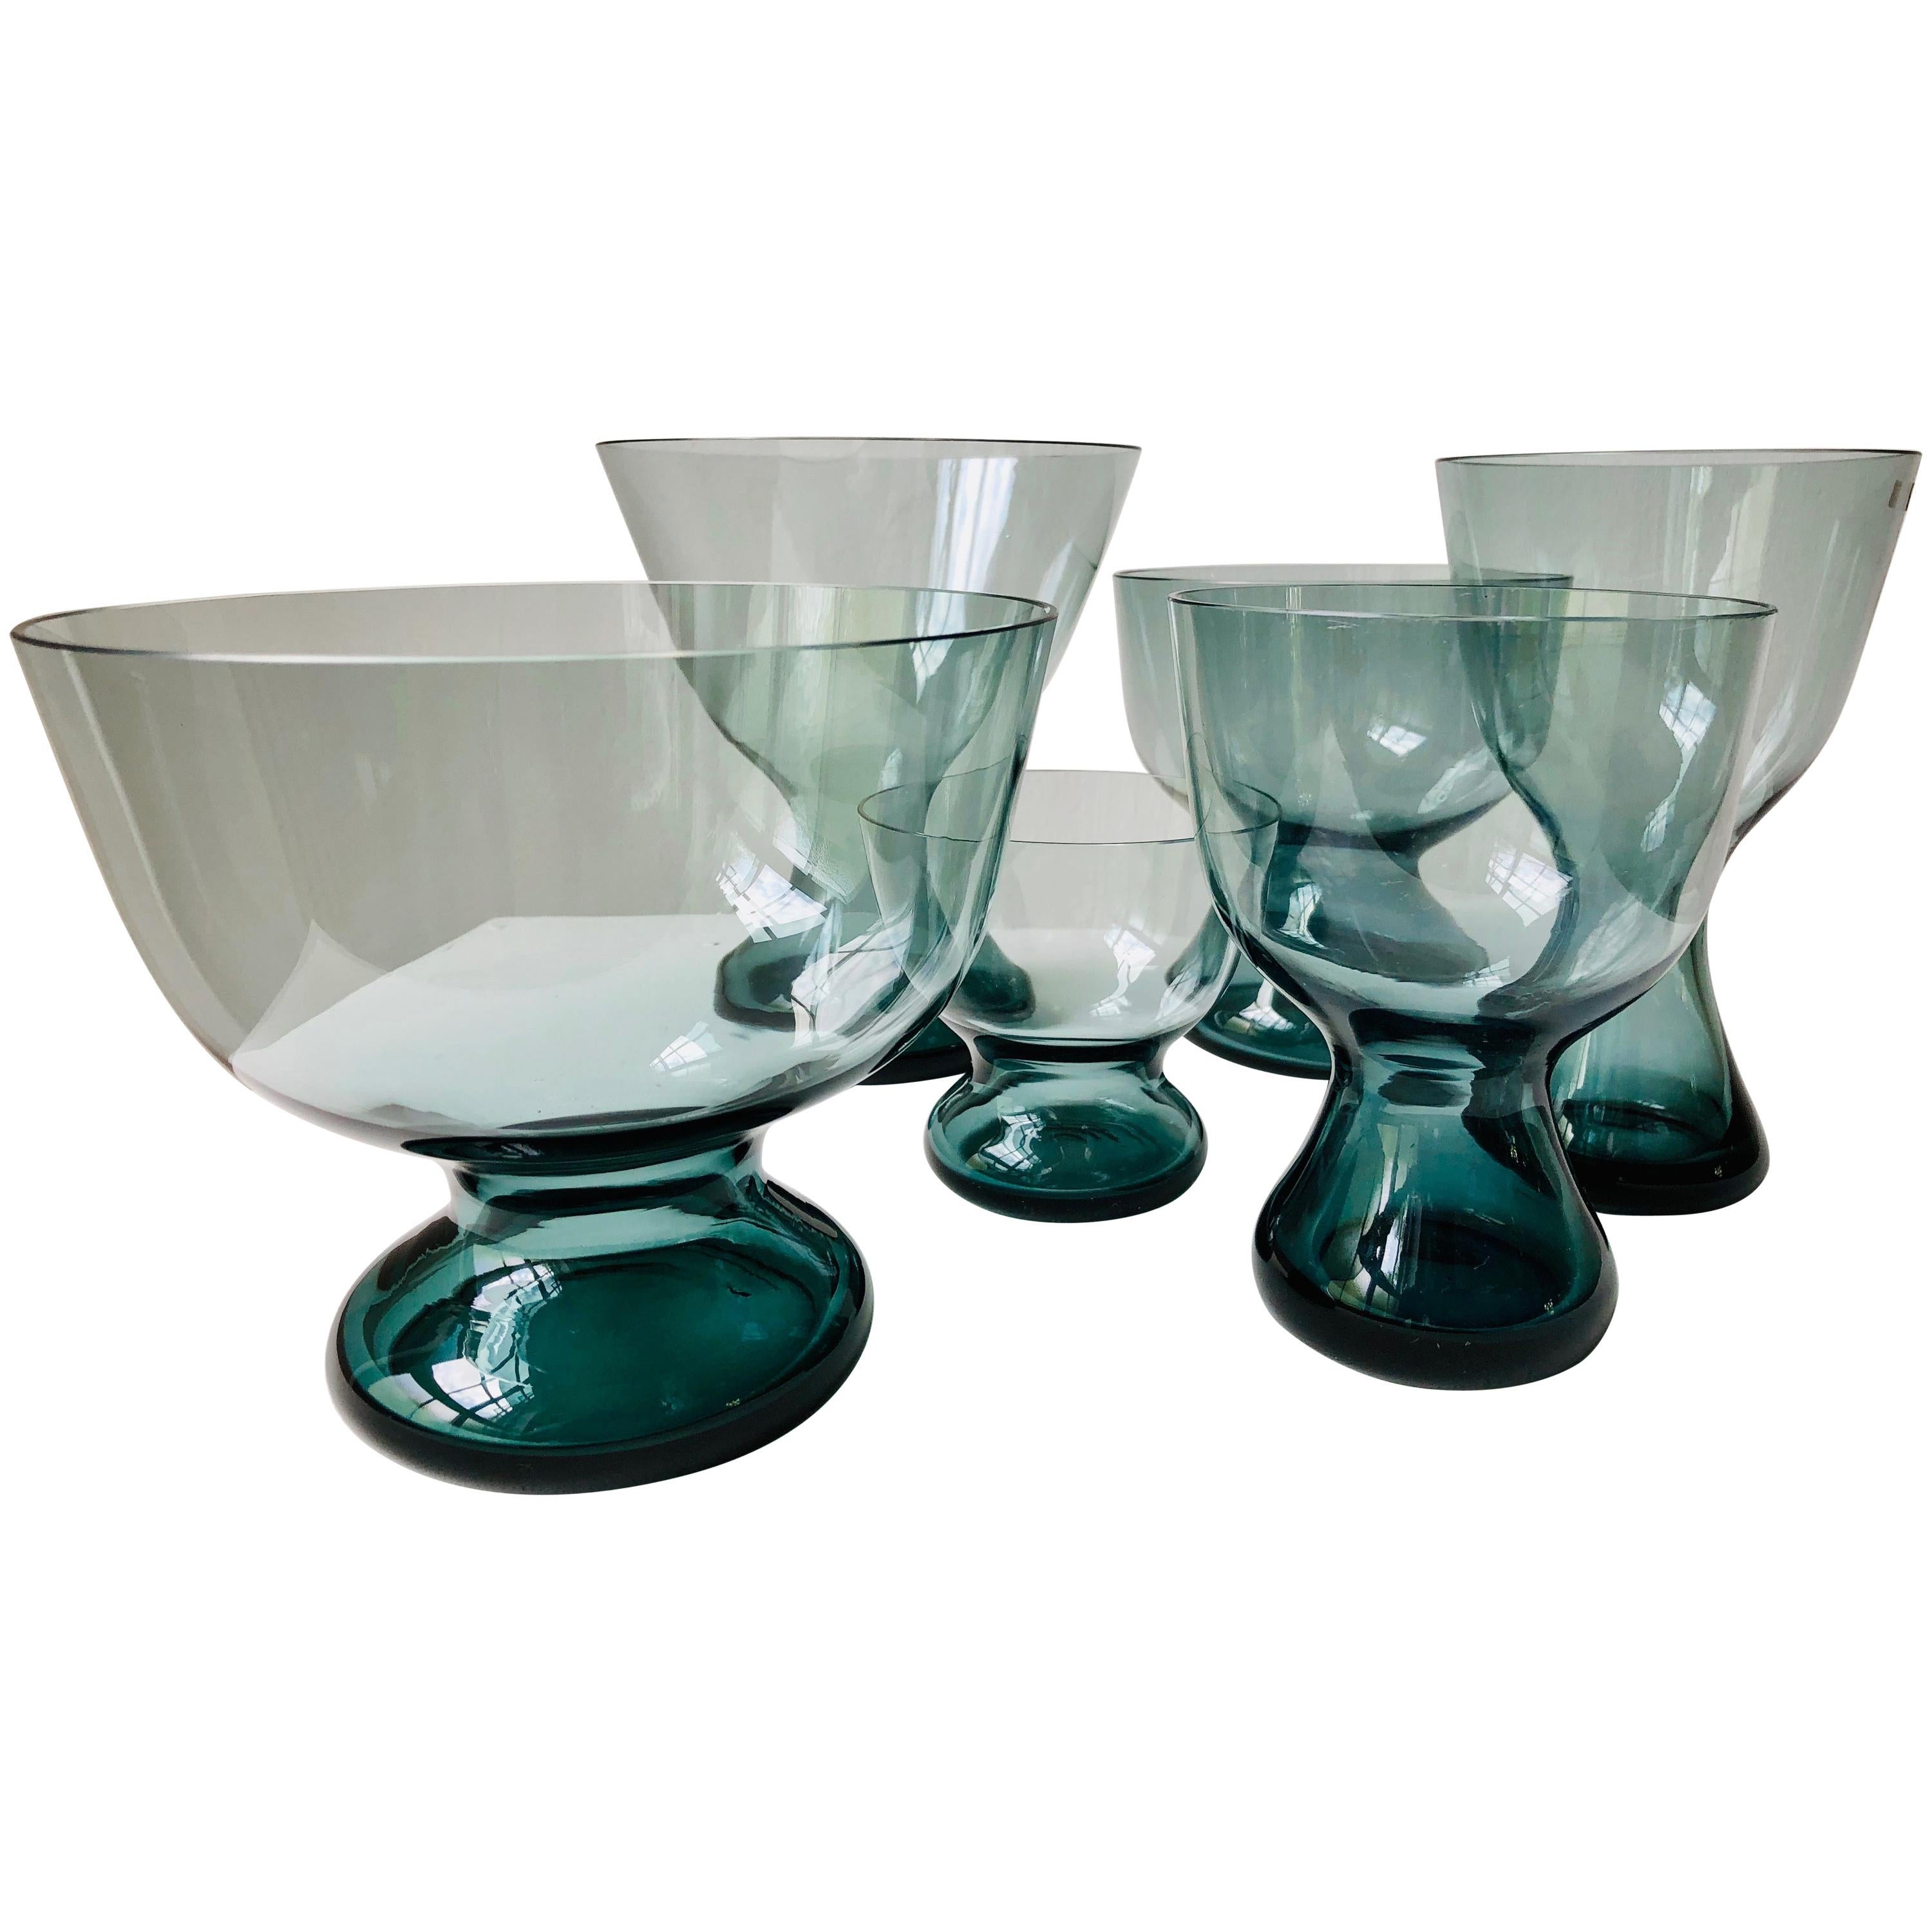 Set of 6 Vases by Wilhelm Wagenfeld for WMF